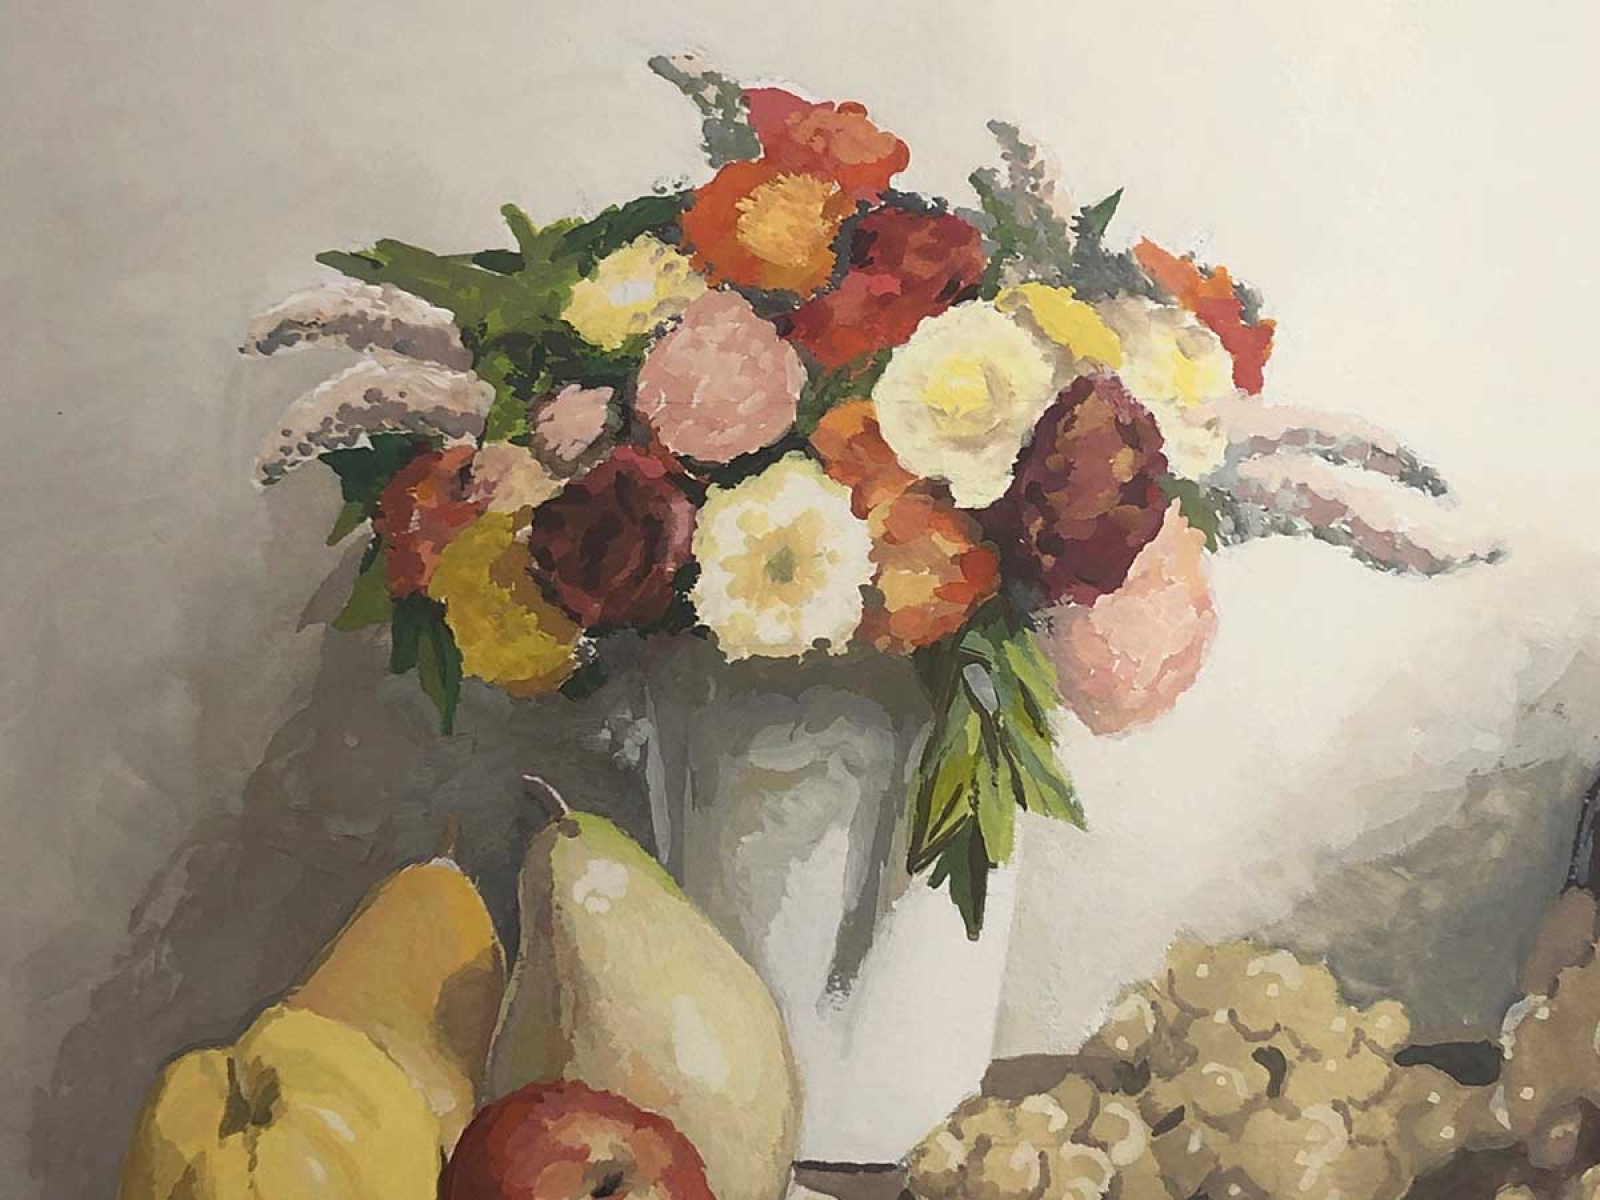 A painting of a pot of flowers and a plate of fruit.